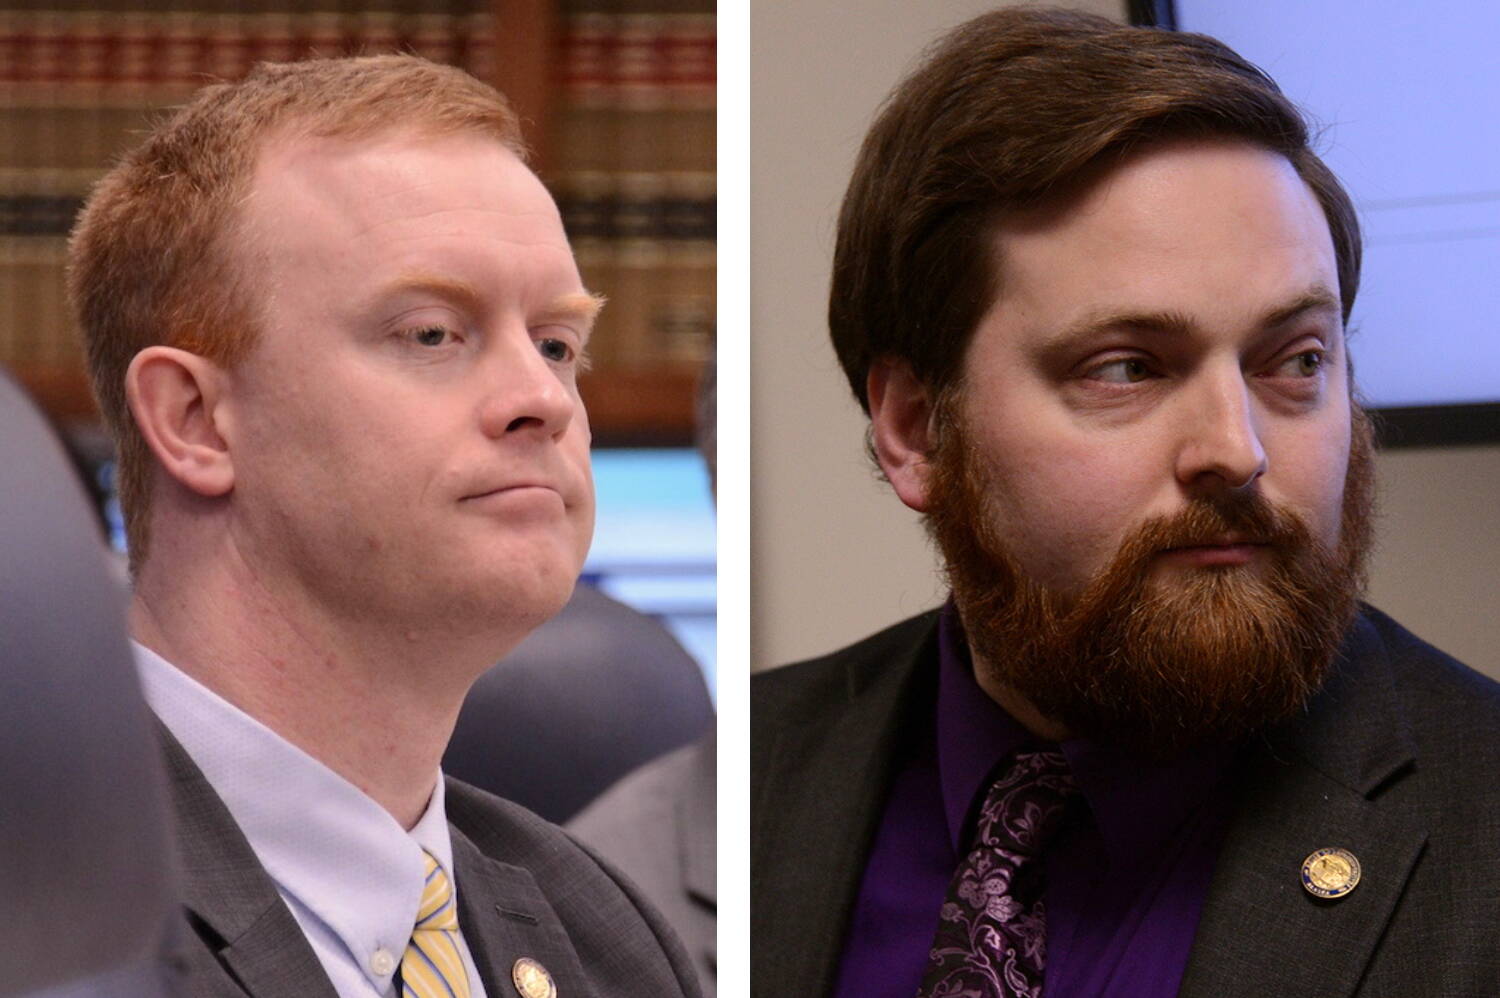 Rep. David Eastman, R-Wasilla, right, and former Rep. Christopher Kurka, R-Wasilla, saw ethics complaints against them dismissed on Nov. 29. (Photos by James Brooks/Alaska Beacon)